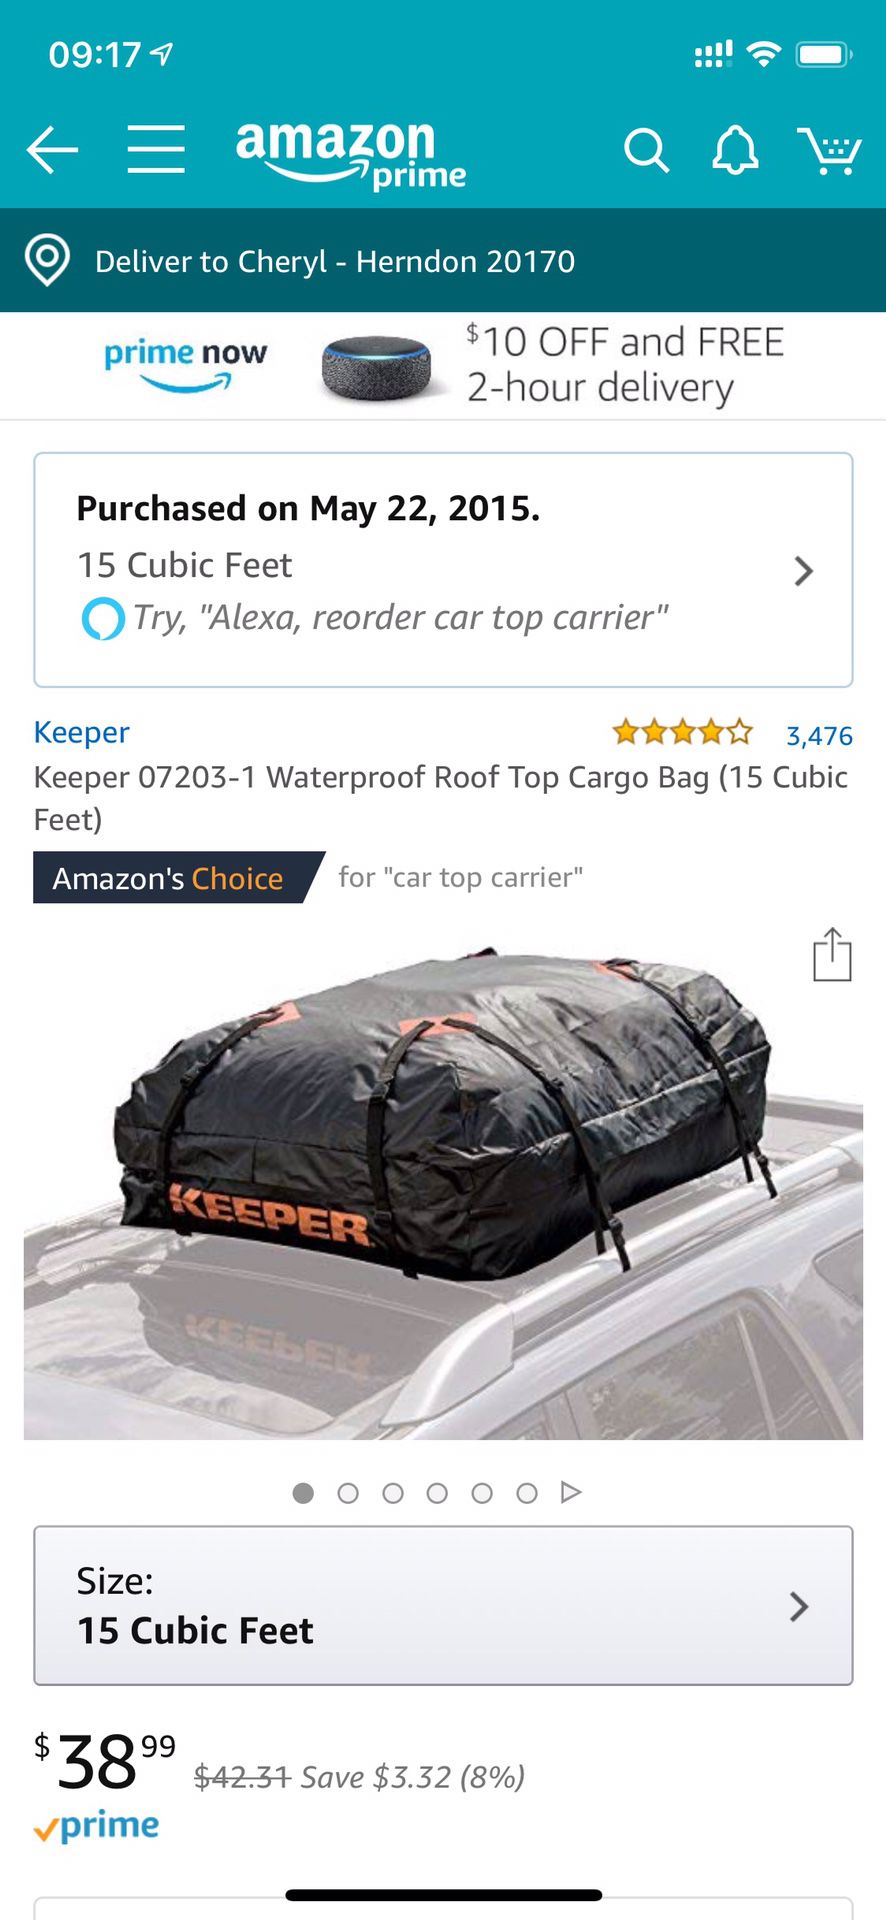 Waterproof roof top cargo bag (15 cubit feet) only used 1 time. $25